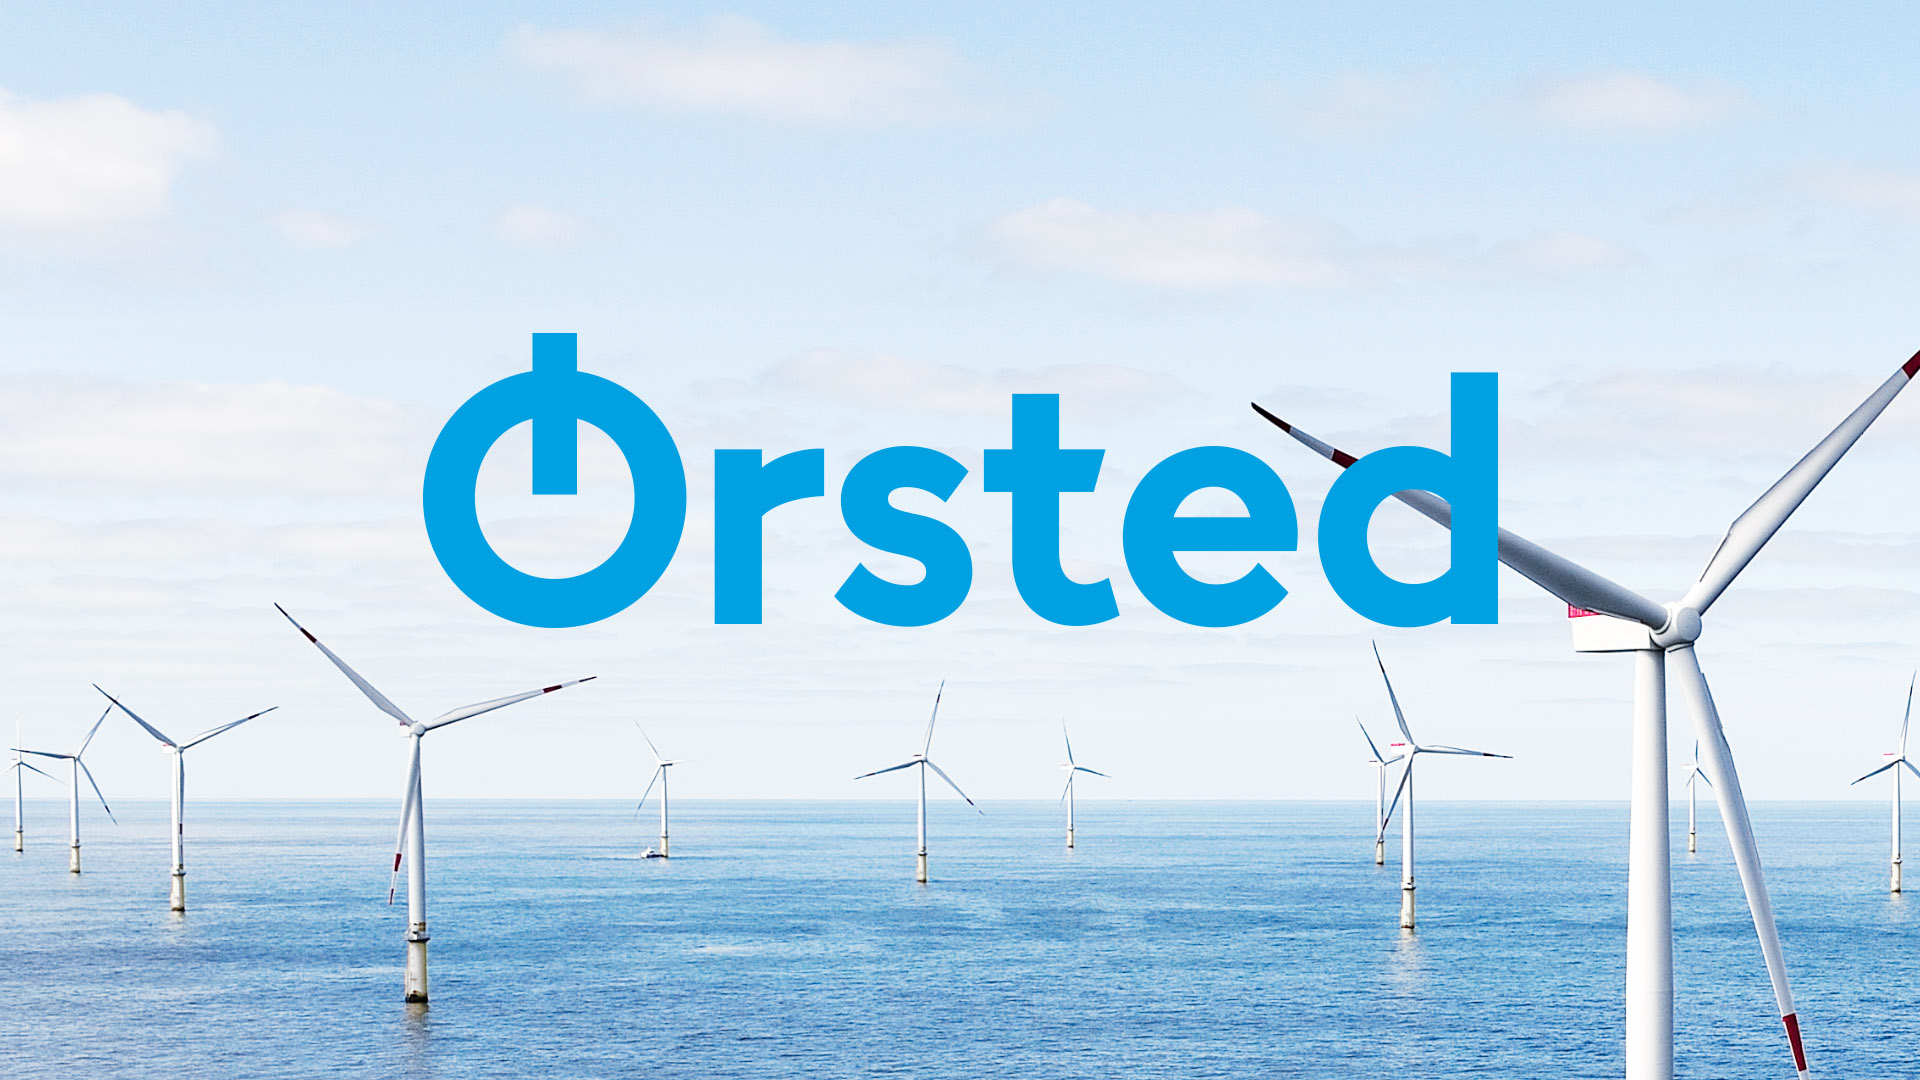 The new Ørsted logo over a field of wind turbines.